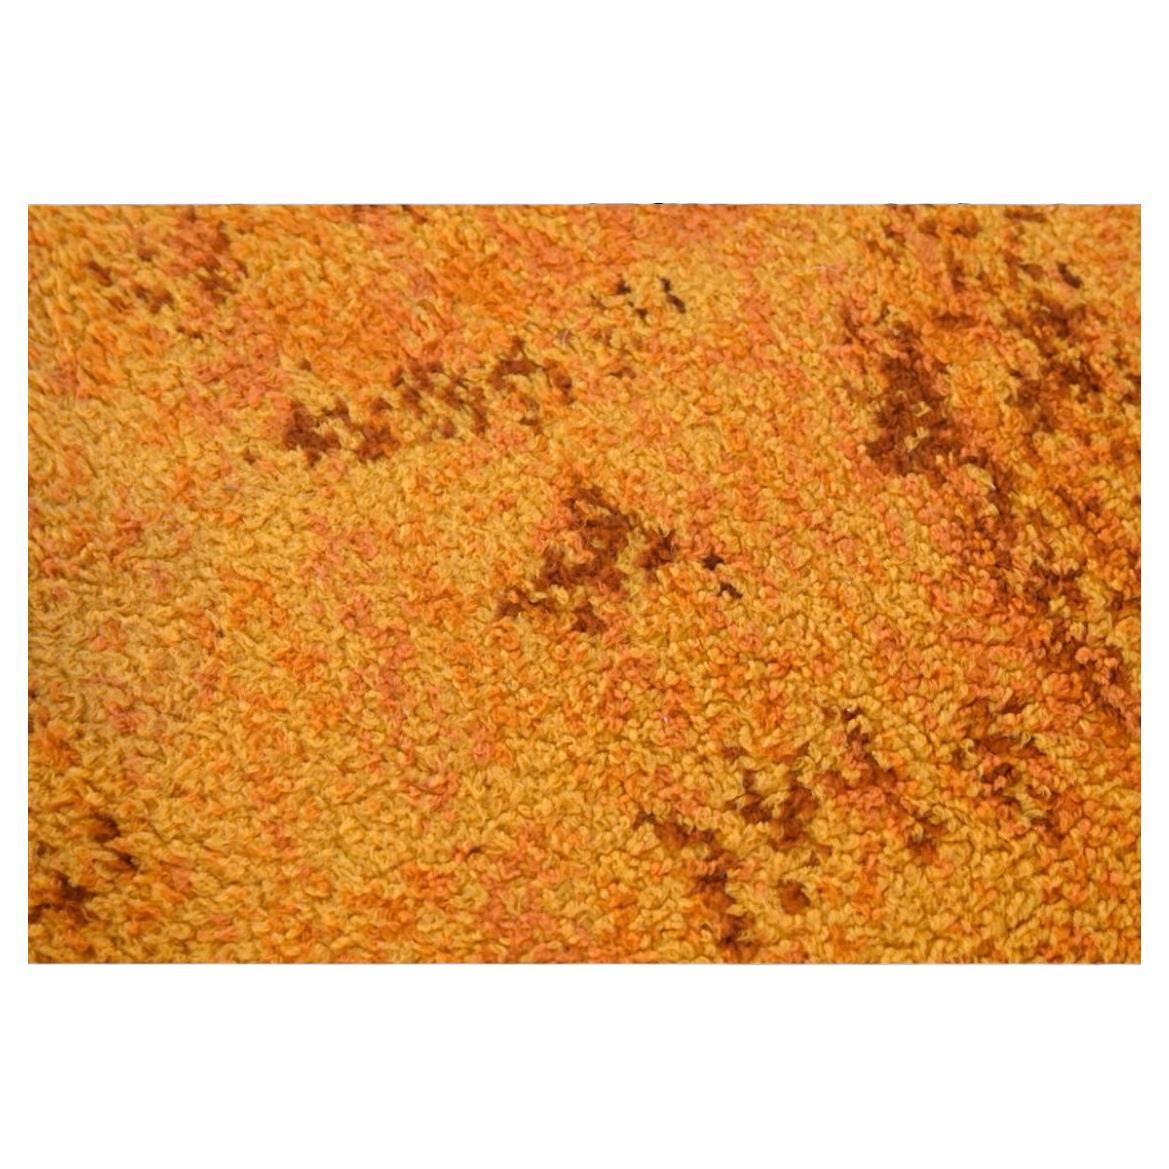 Mid century colorful Scandinavian abstract large shag Ege Rya rug. Beautiful abstract geometric yellows oranges and reds. Nice medium pile soft wool woven rug. Good vintage condition. Located in Brooklyn NYC.

Measures 155” x 118”

